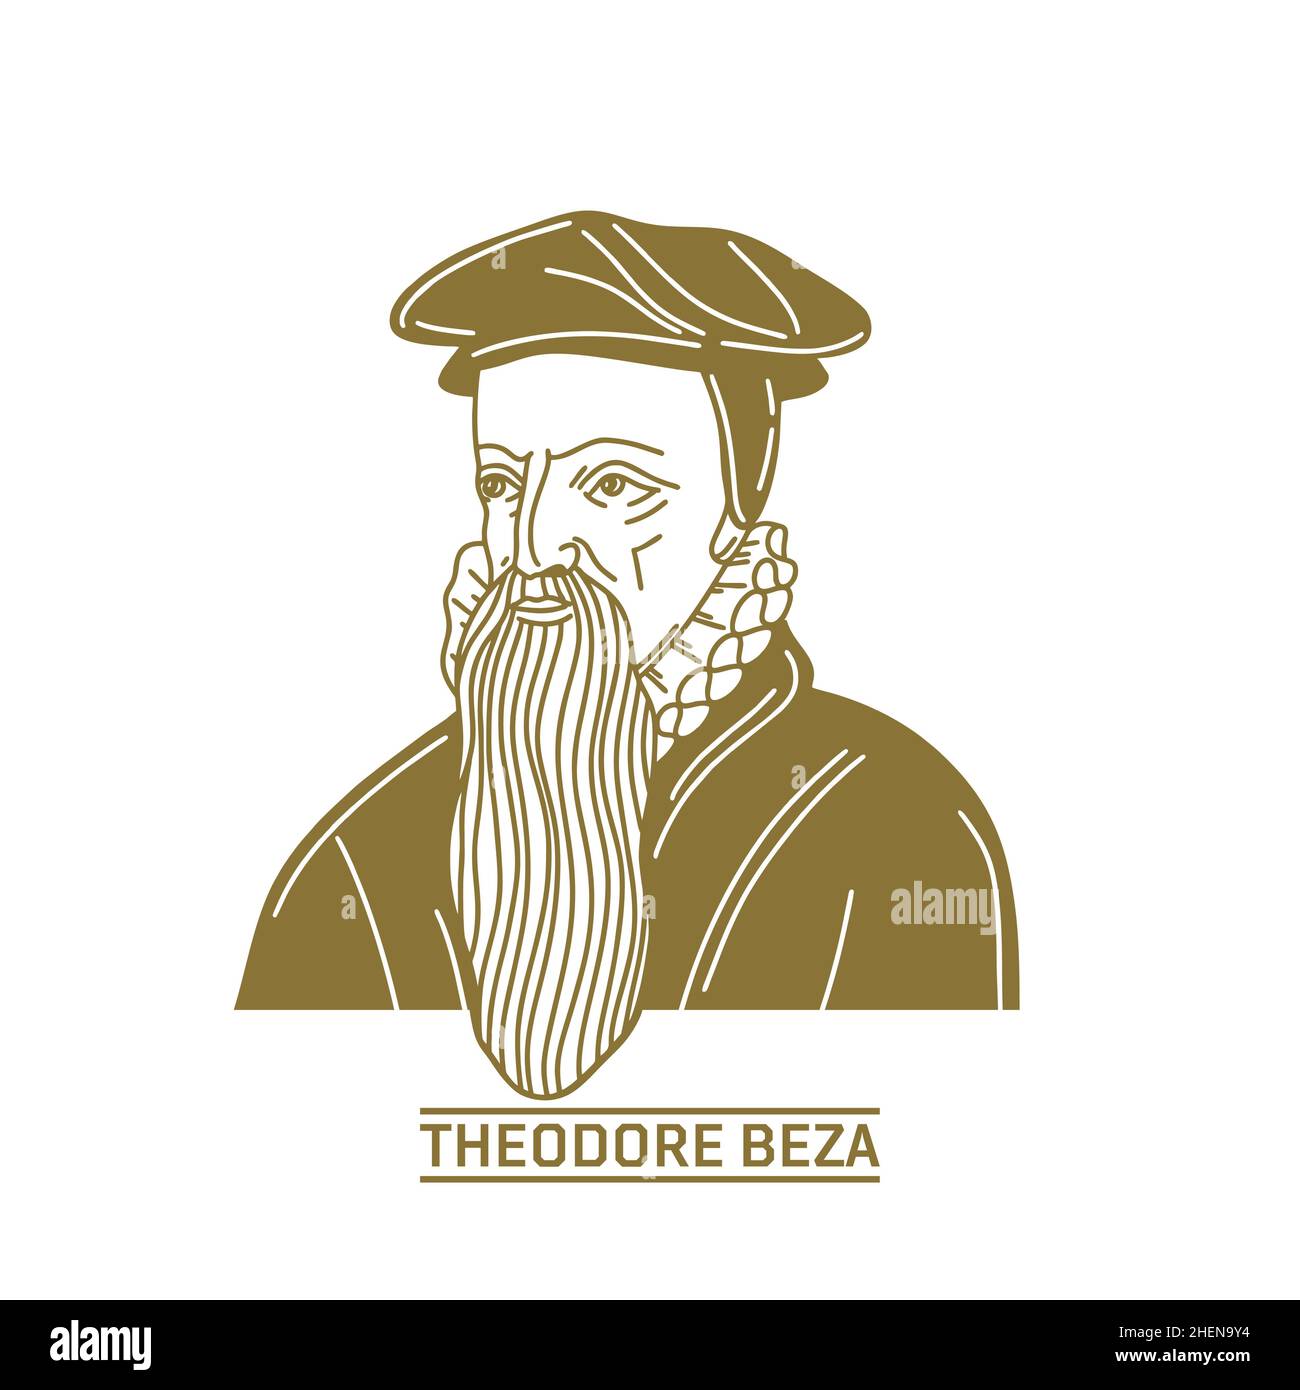 Theodore Beza (1519-1605) was a French Reformed Protestant theologian, reformer and scholar who played an important role in the Reformation. Christian Stock Vector